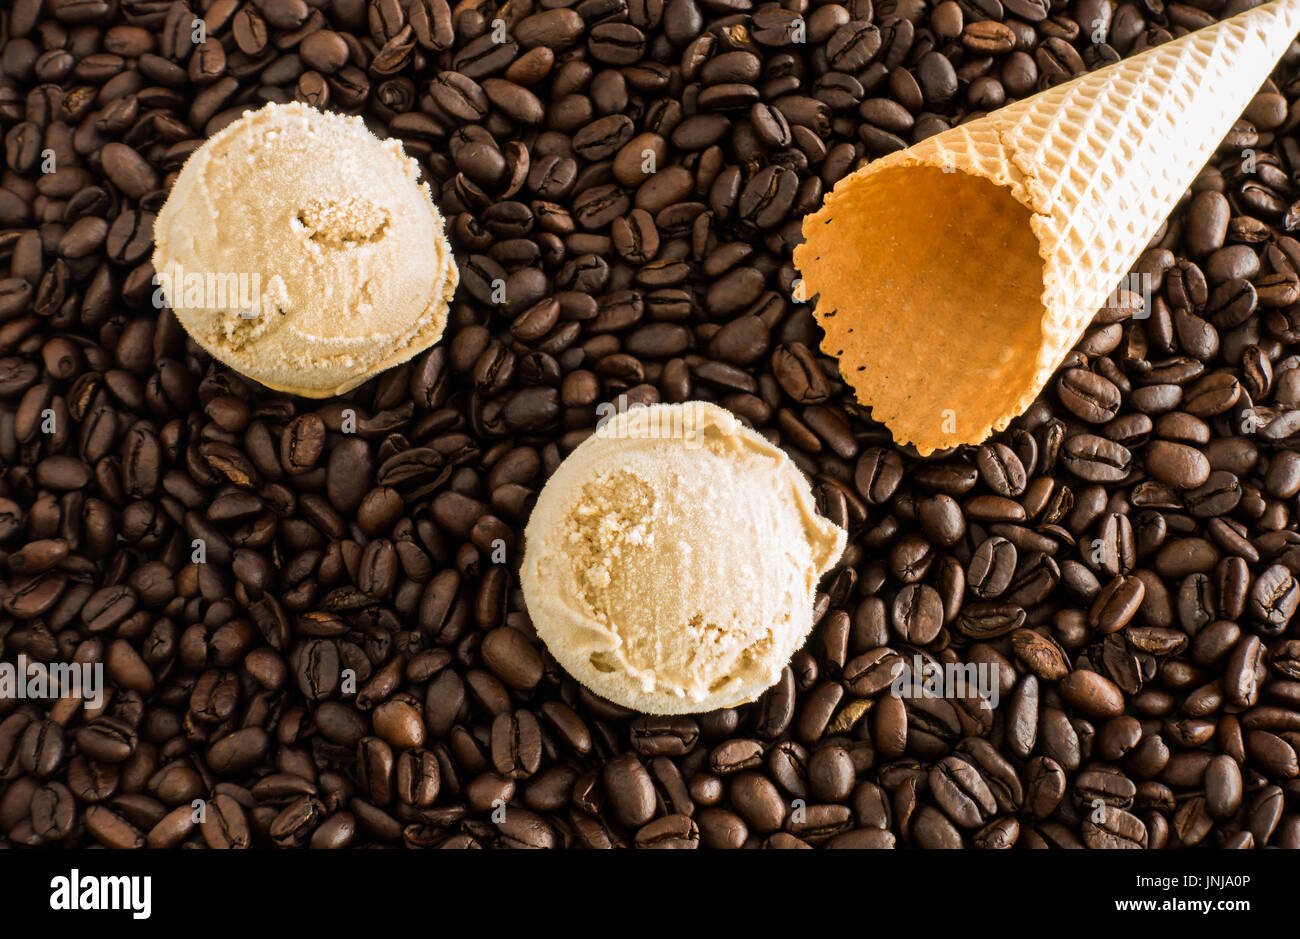 Two scoops of homemade coffee ice cream and an empty ice cream cone on whole dark roasted coffee beans. Stock Photo